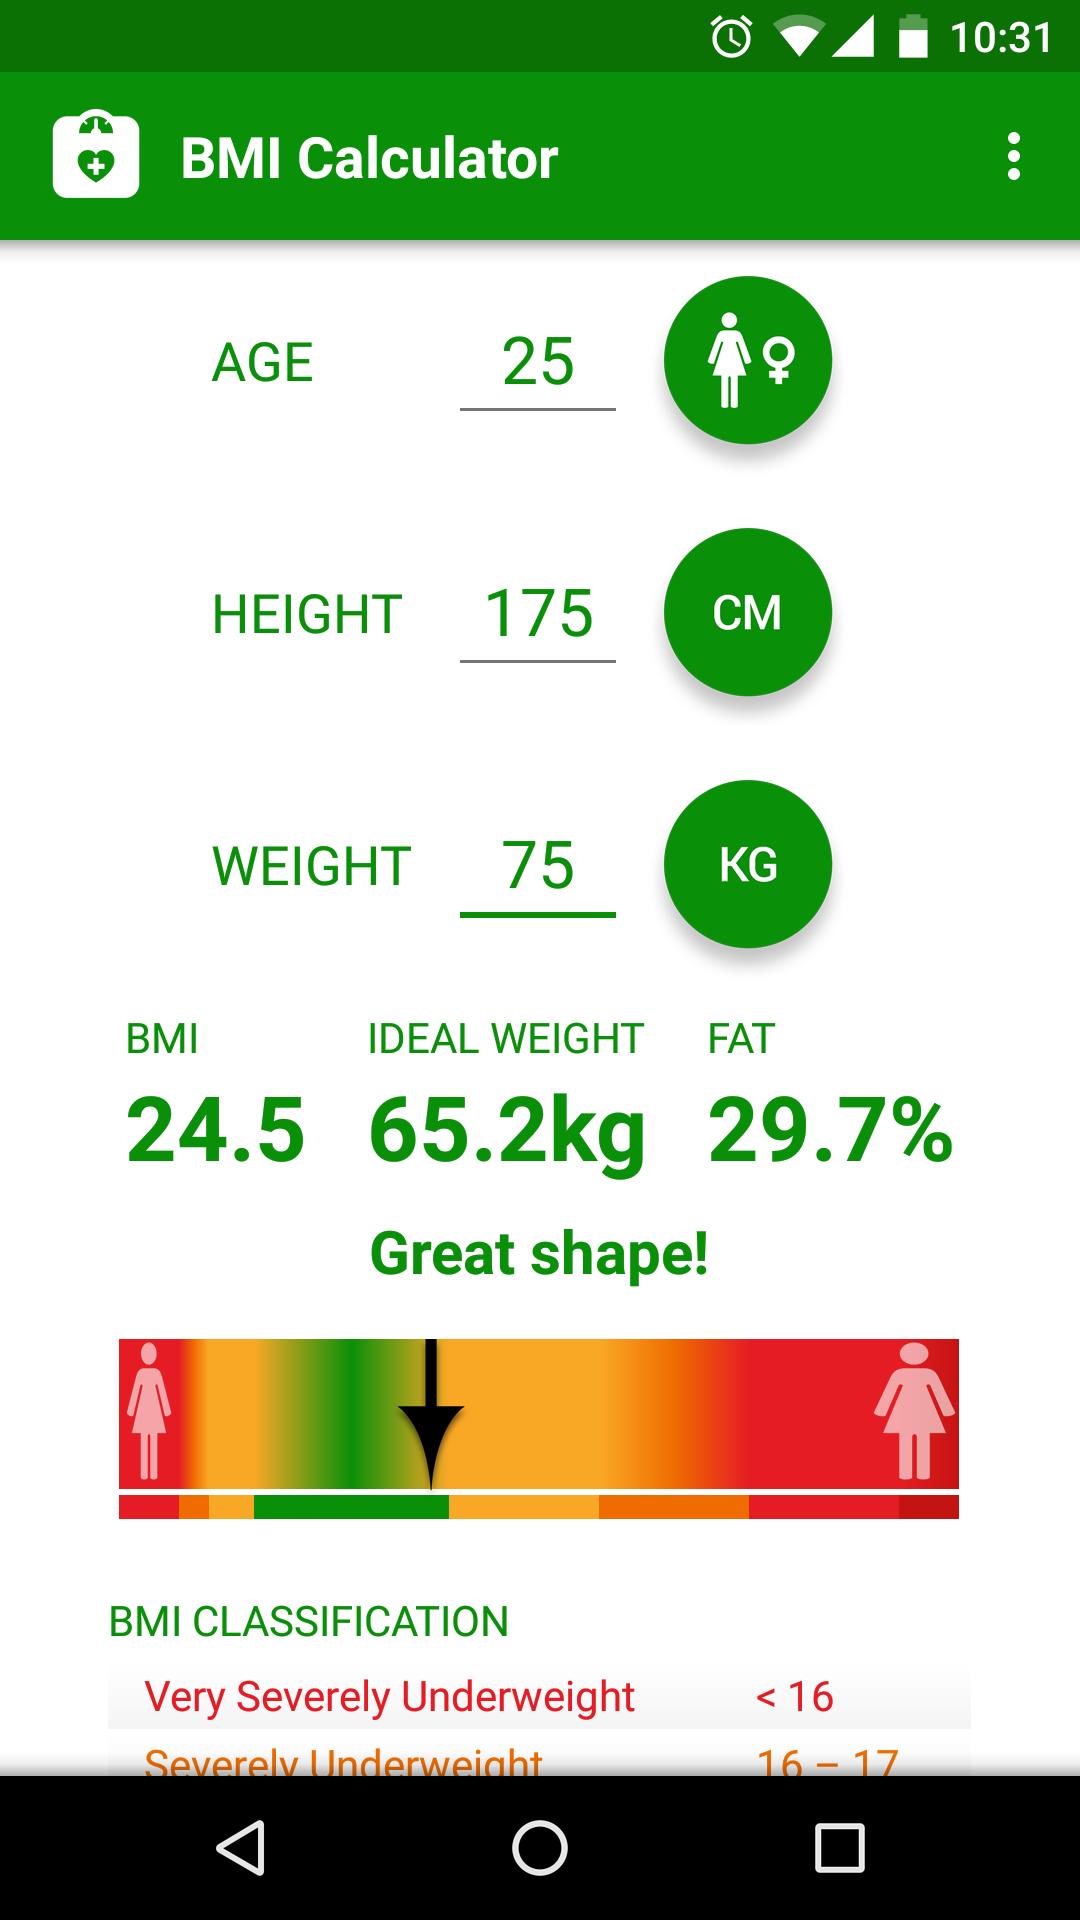 BMI Calculator for Android - APK Download